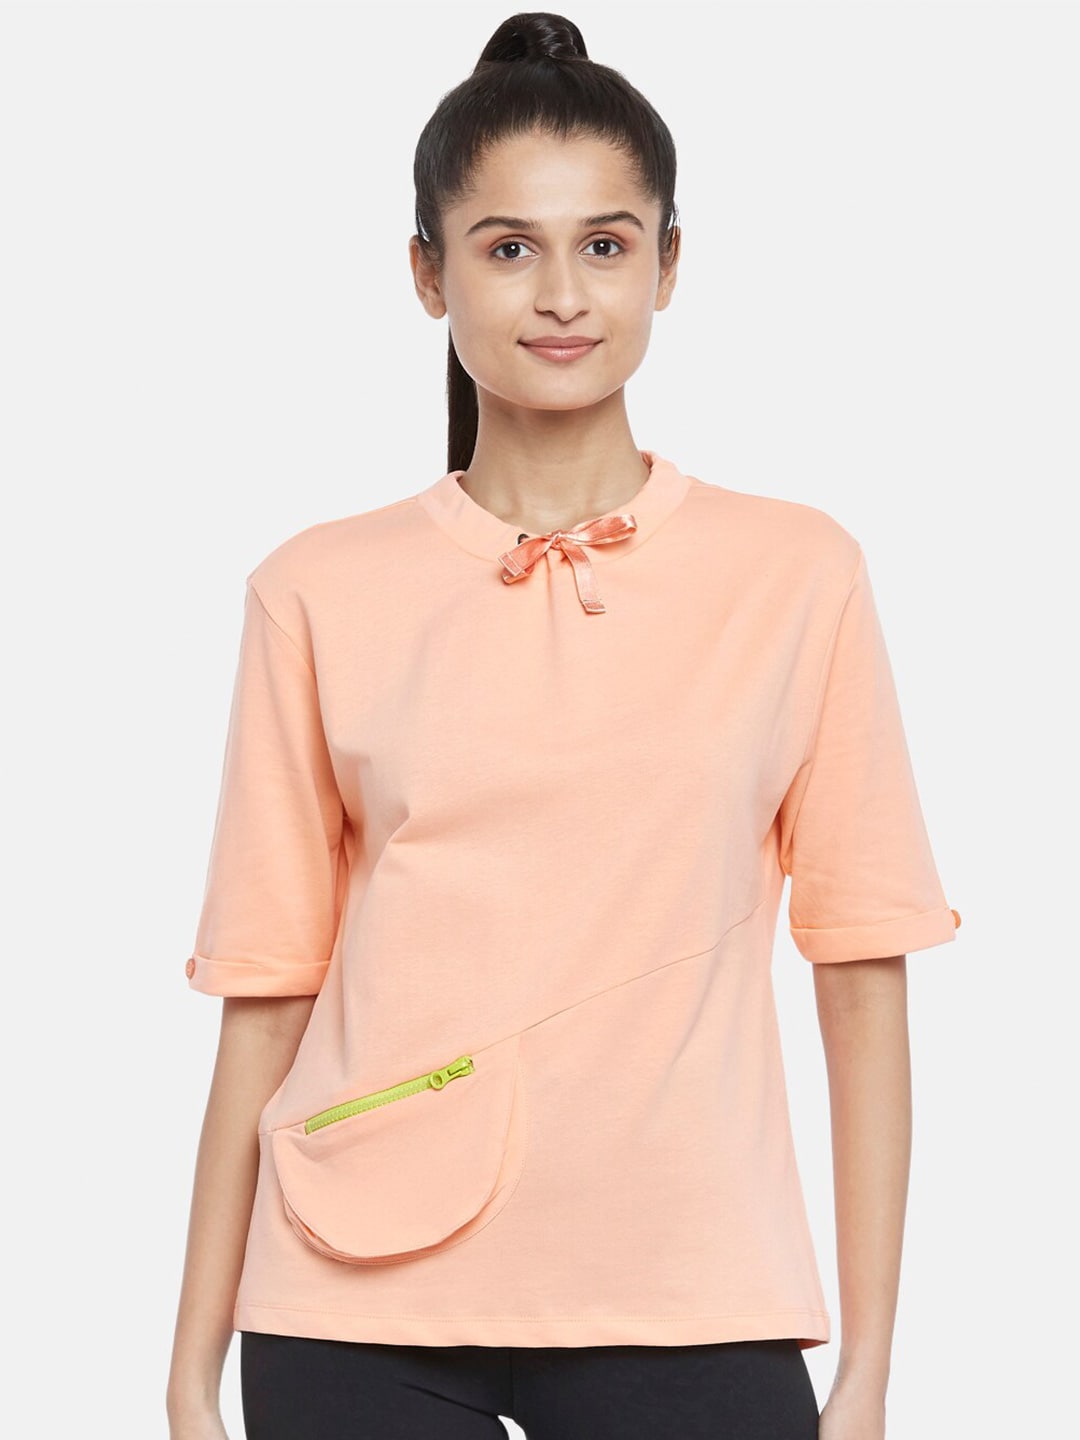 Ajile by Pantaloons Women Coral Solid Sweatshirt Price in India